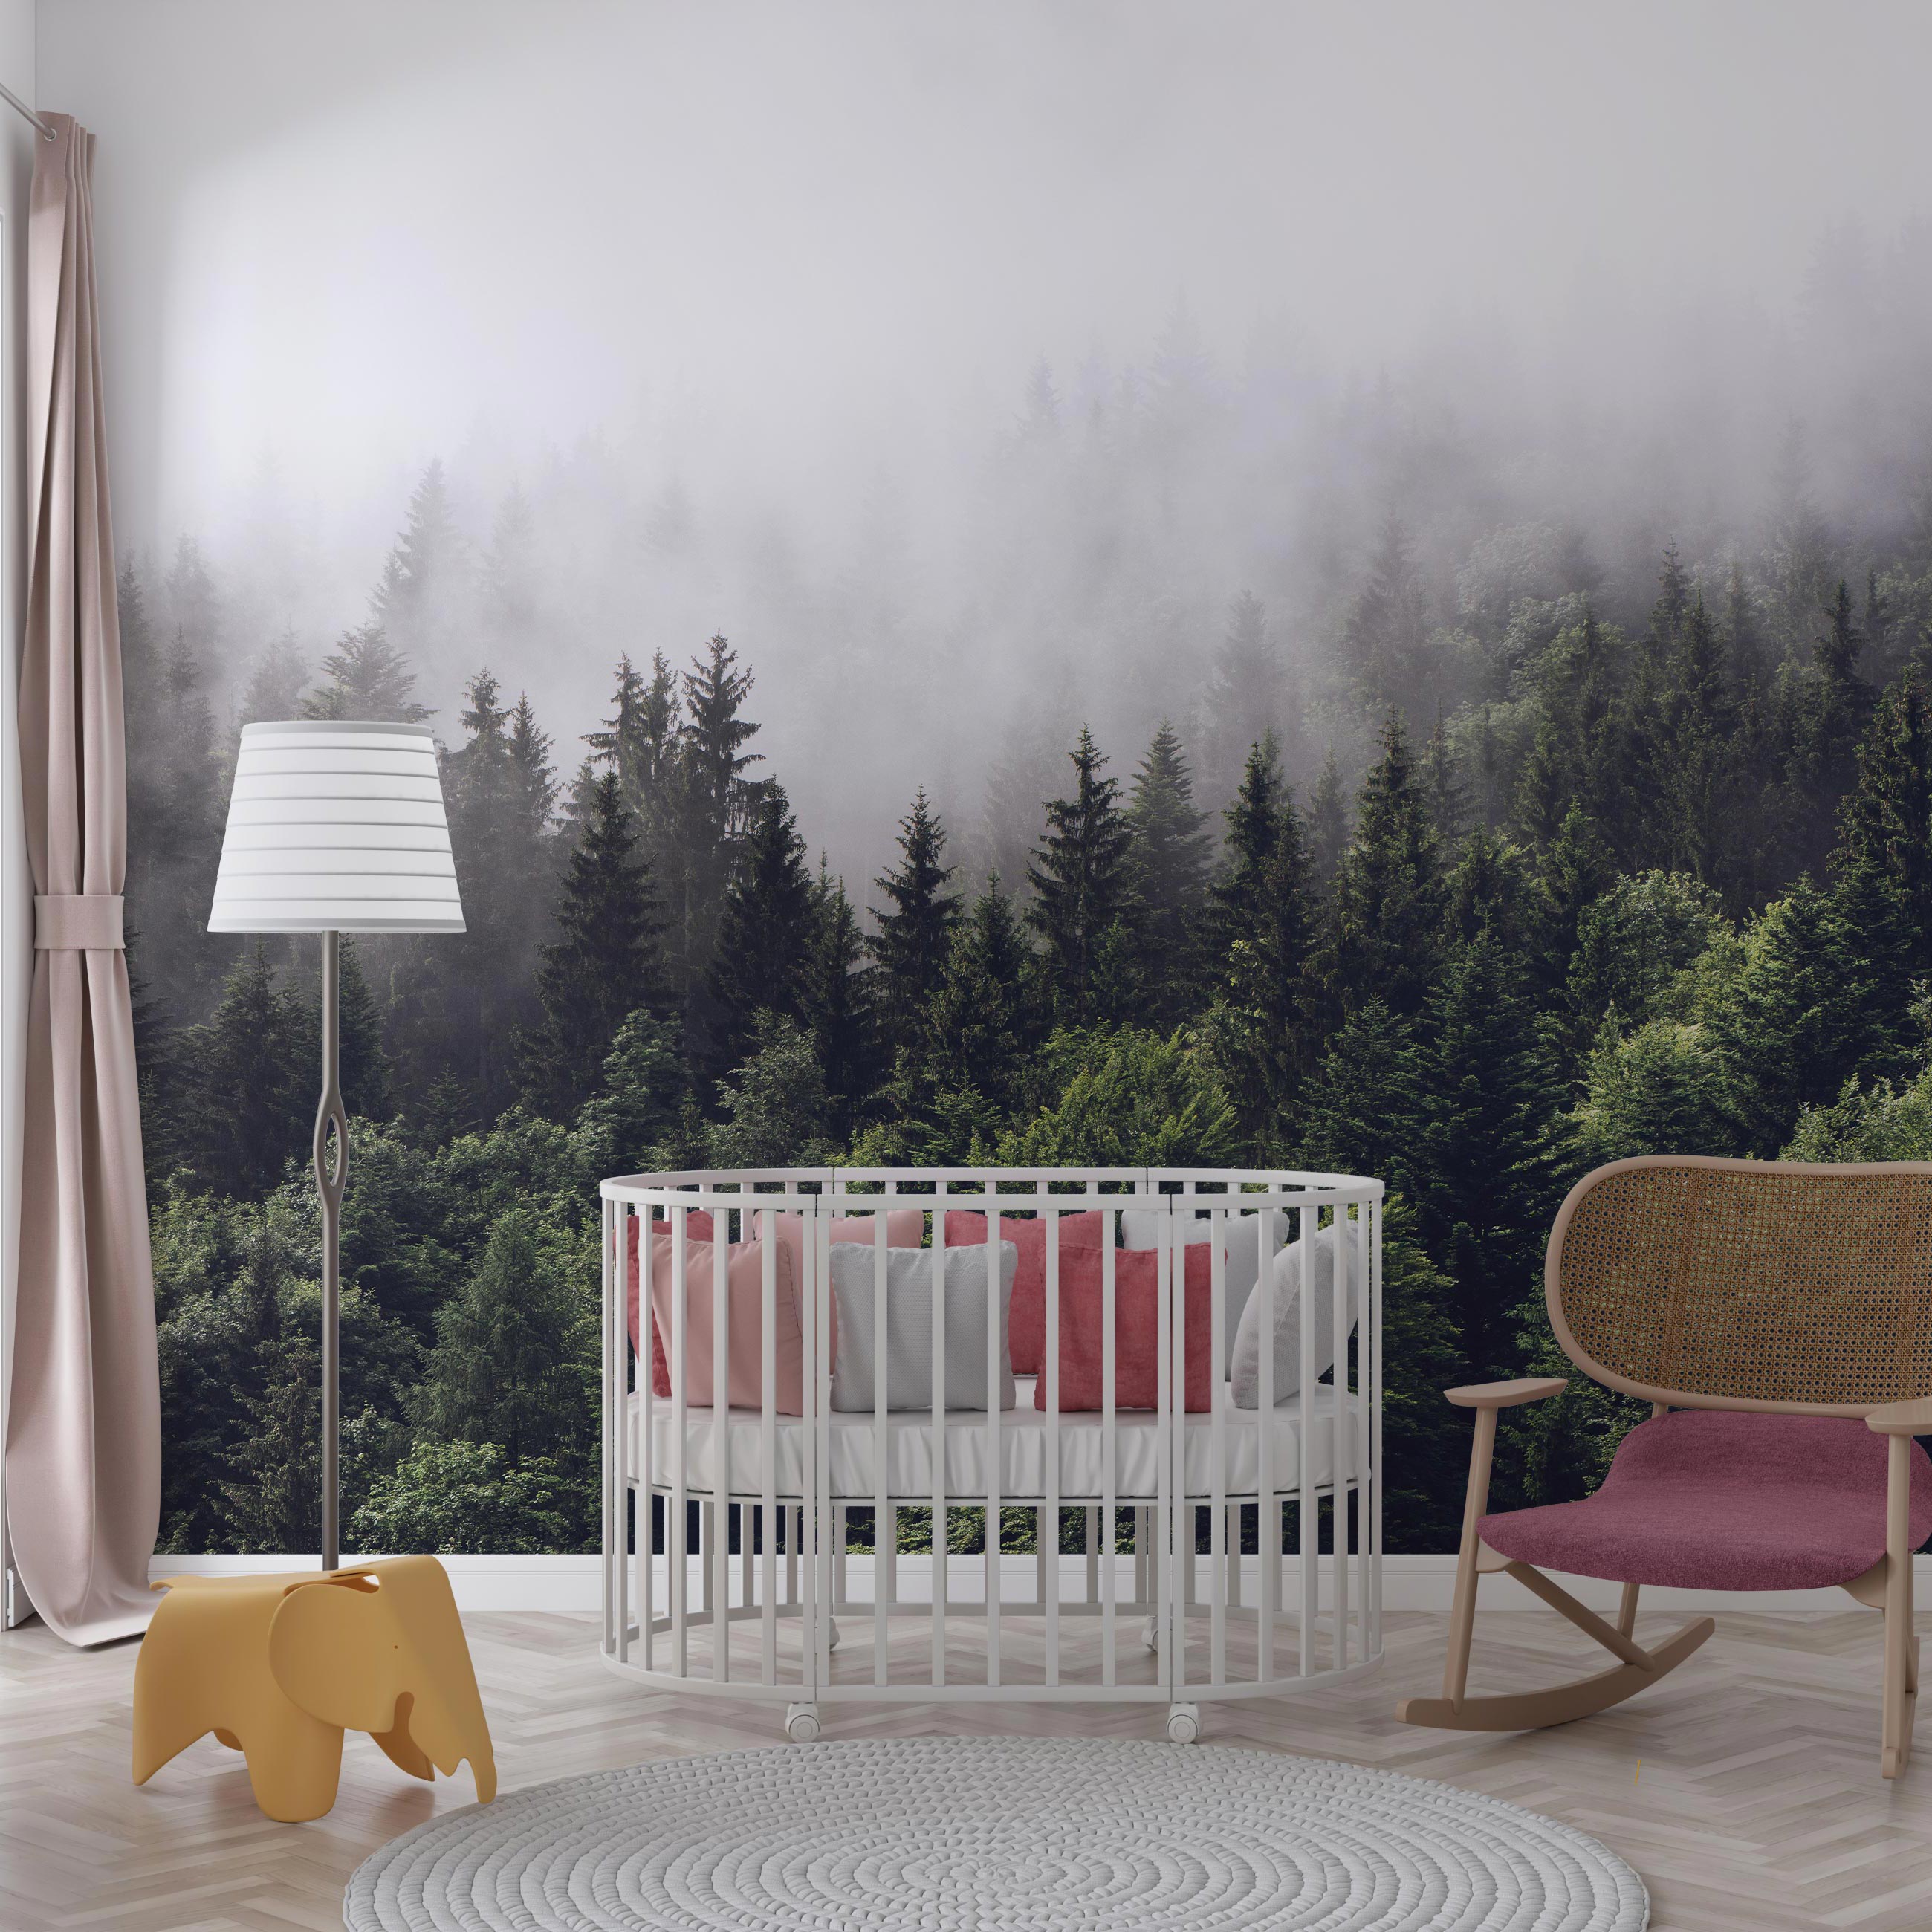 files/A-peel-and-stick-wallpaper-mural-depicting-a-foggy-forest.-The-forest-is-filled-with-tall-trees_-ferns_-and-moss.-The-fog-creates-a-sense-of-mystery-and-wonder_-perfect-for-a-child_s.jpg